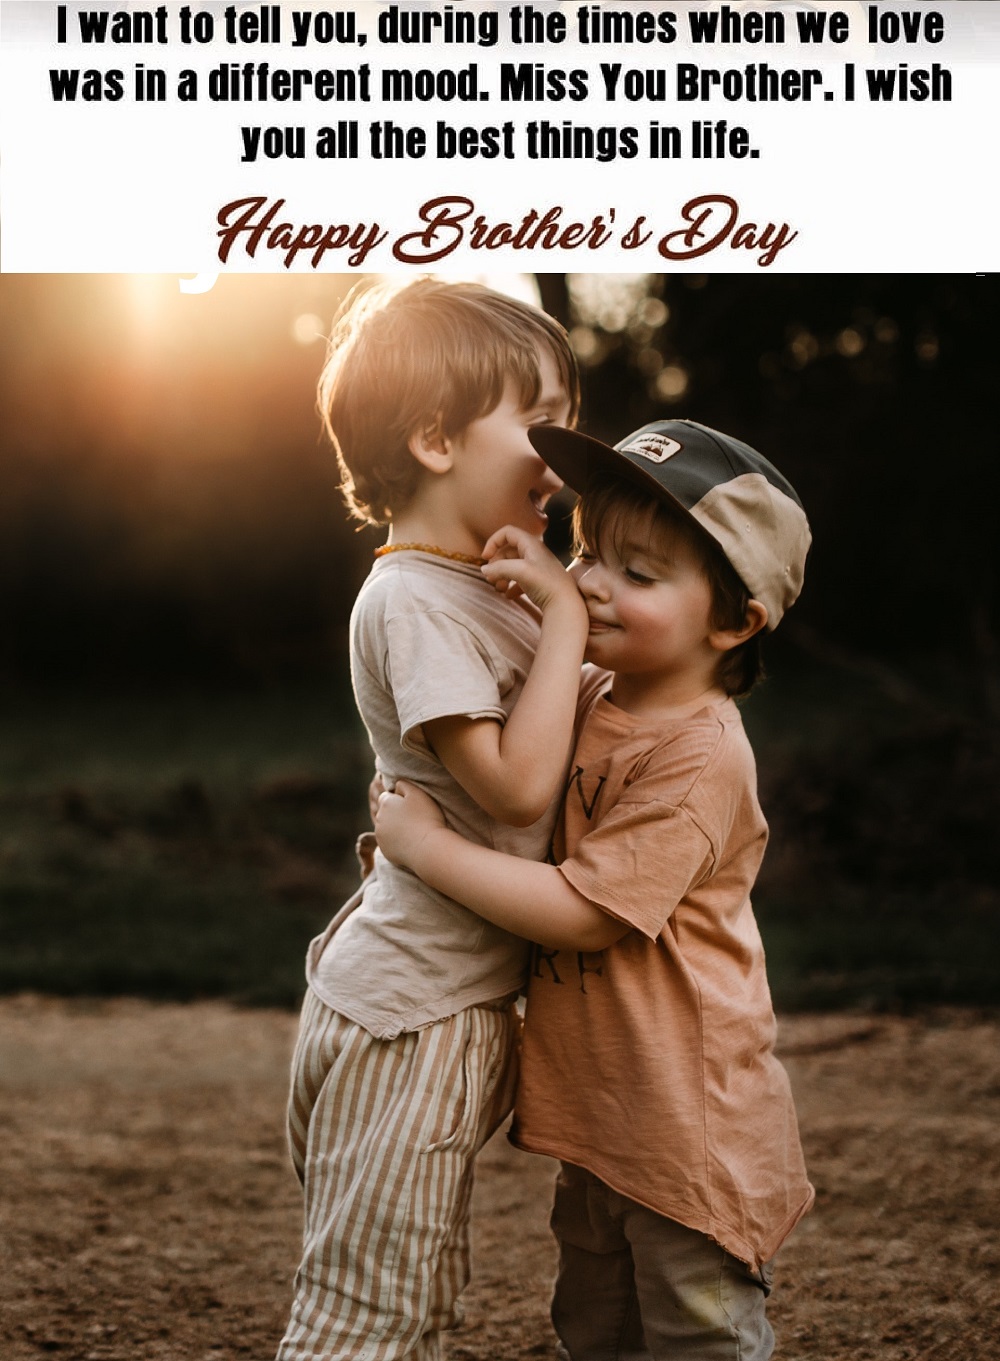 Happy Brothers Day messages